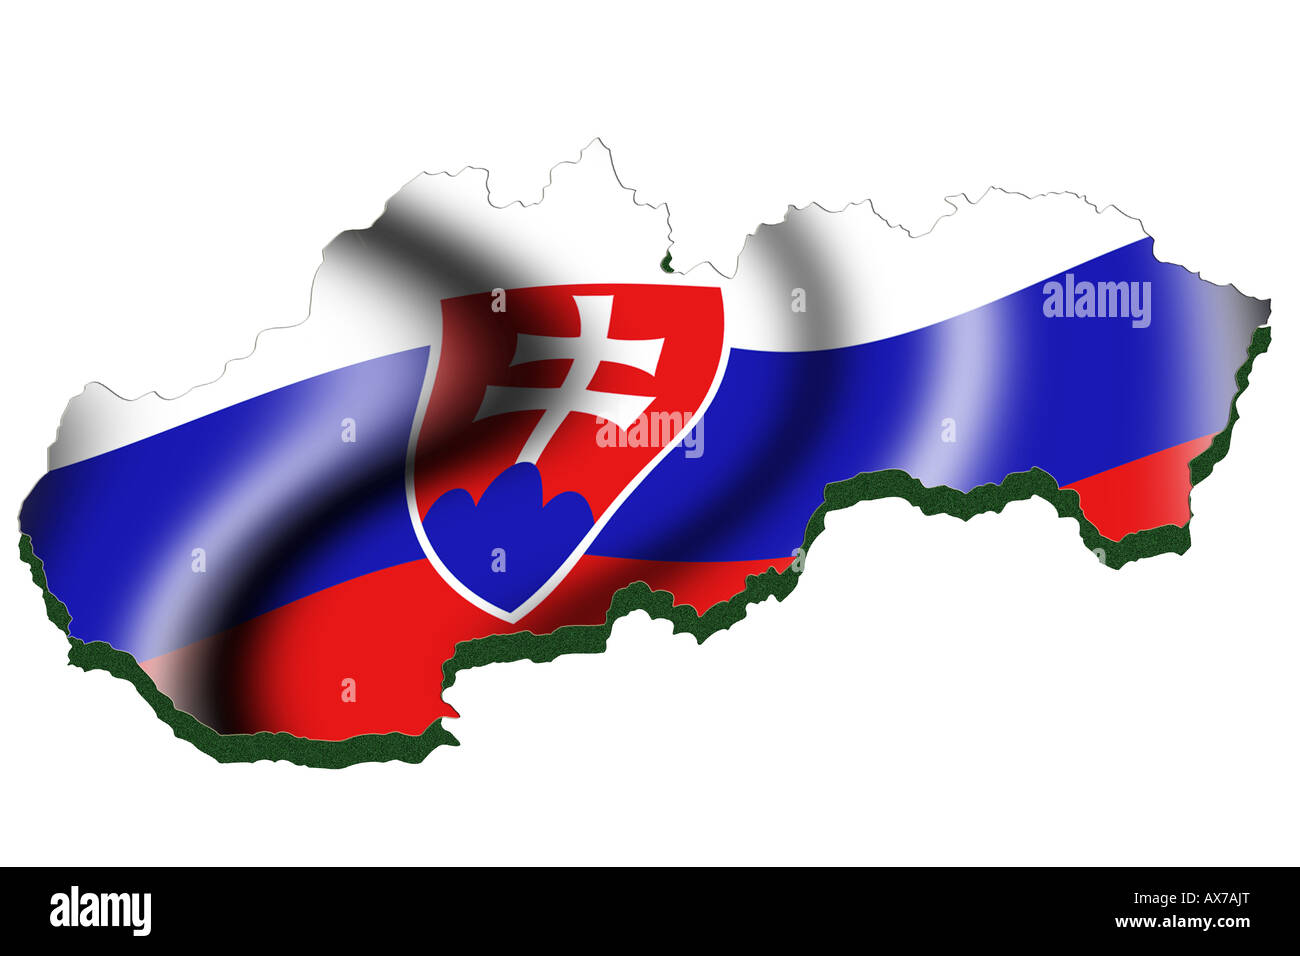 Outline map and flag of Slovakia Stock Photo